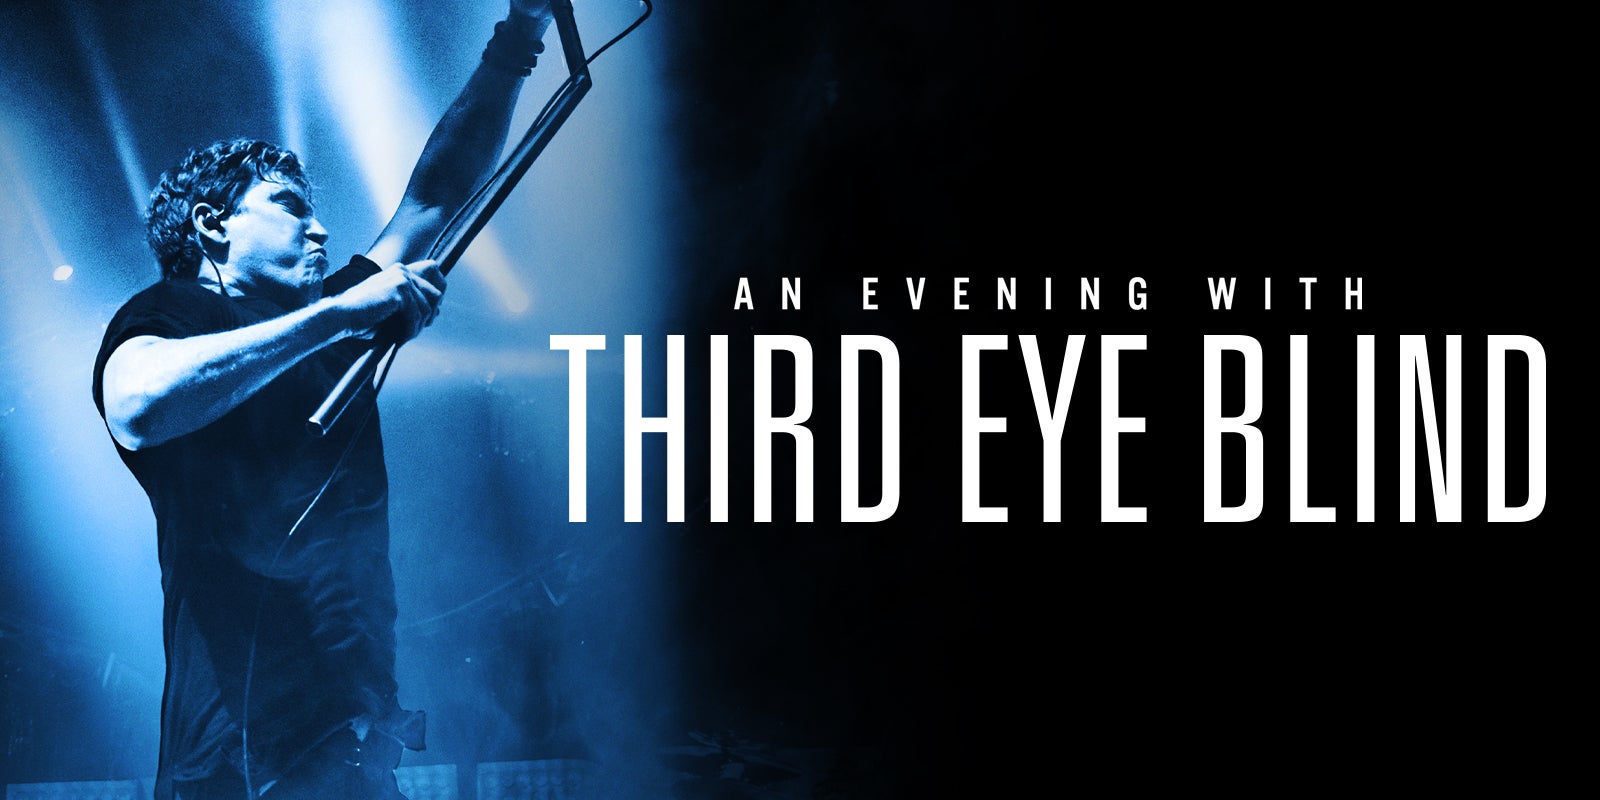 Third Eye Blind shown performing at left, with text An Evening with Third Eye Blind at right